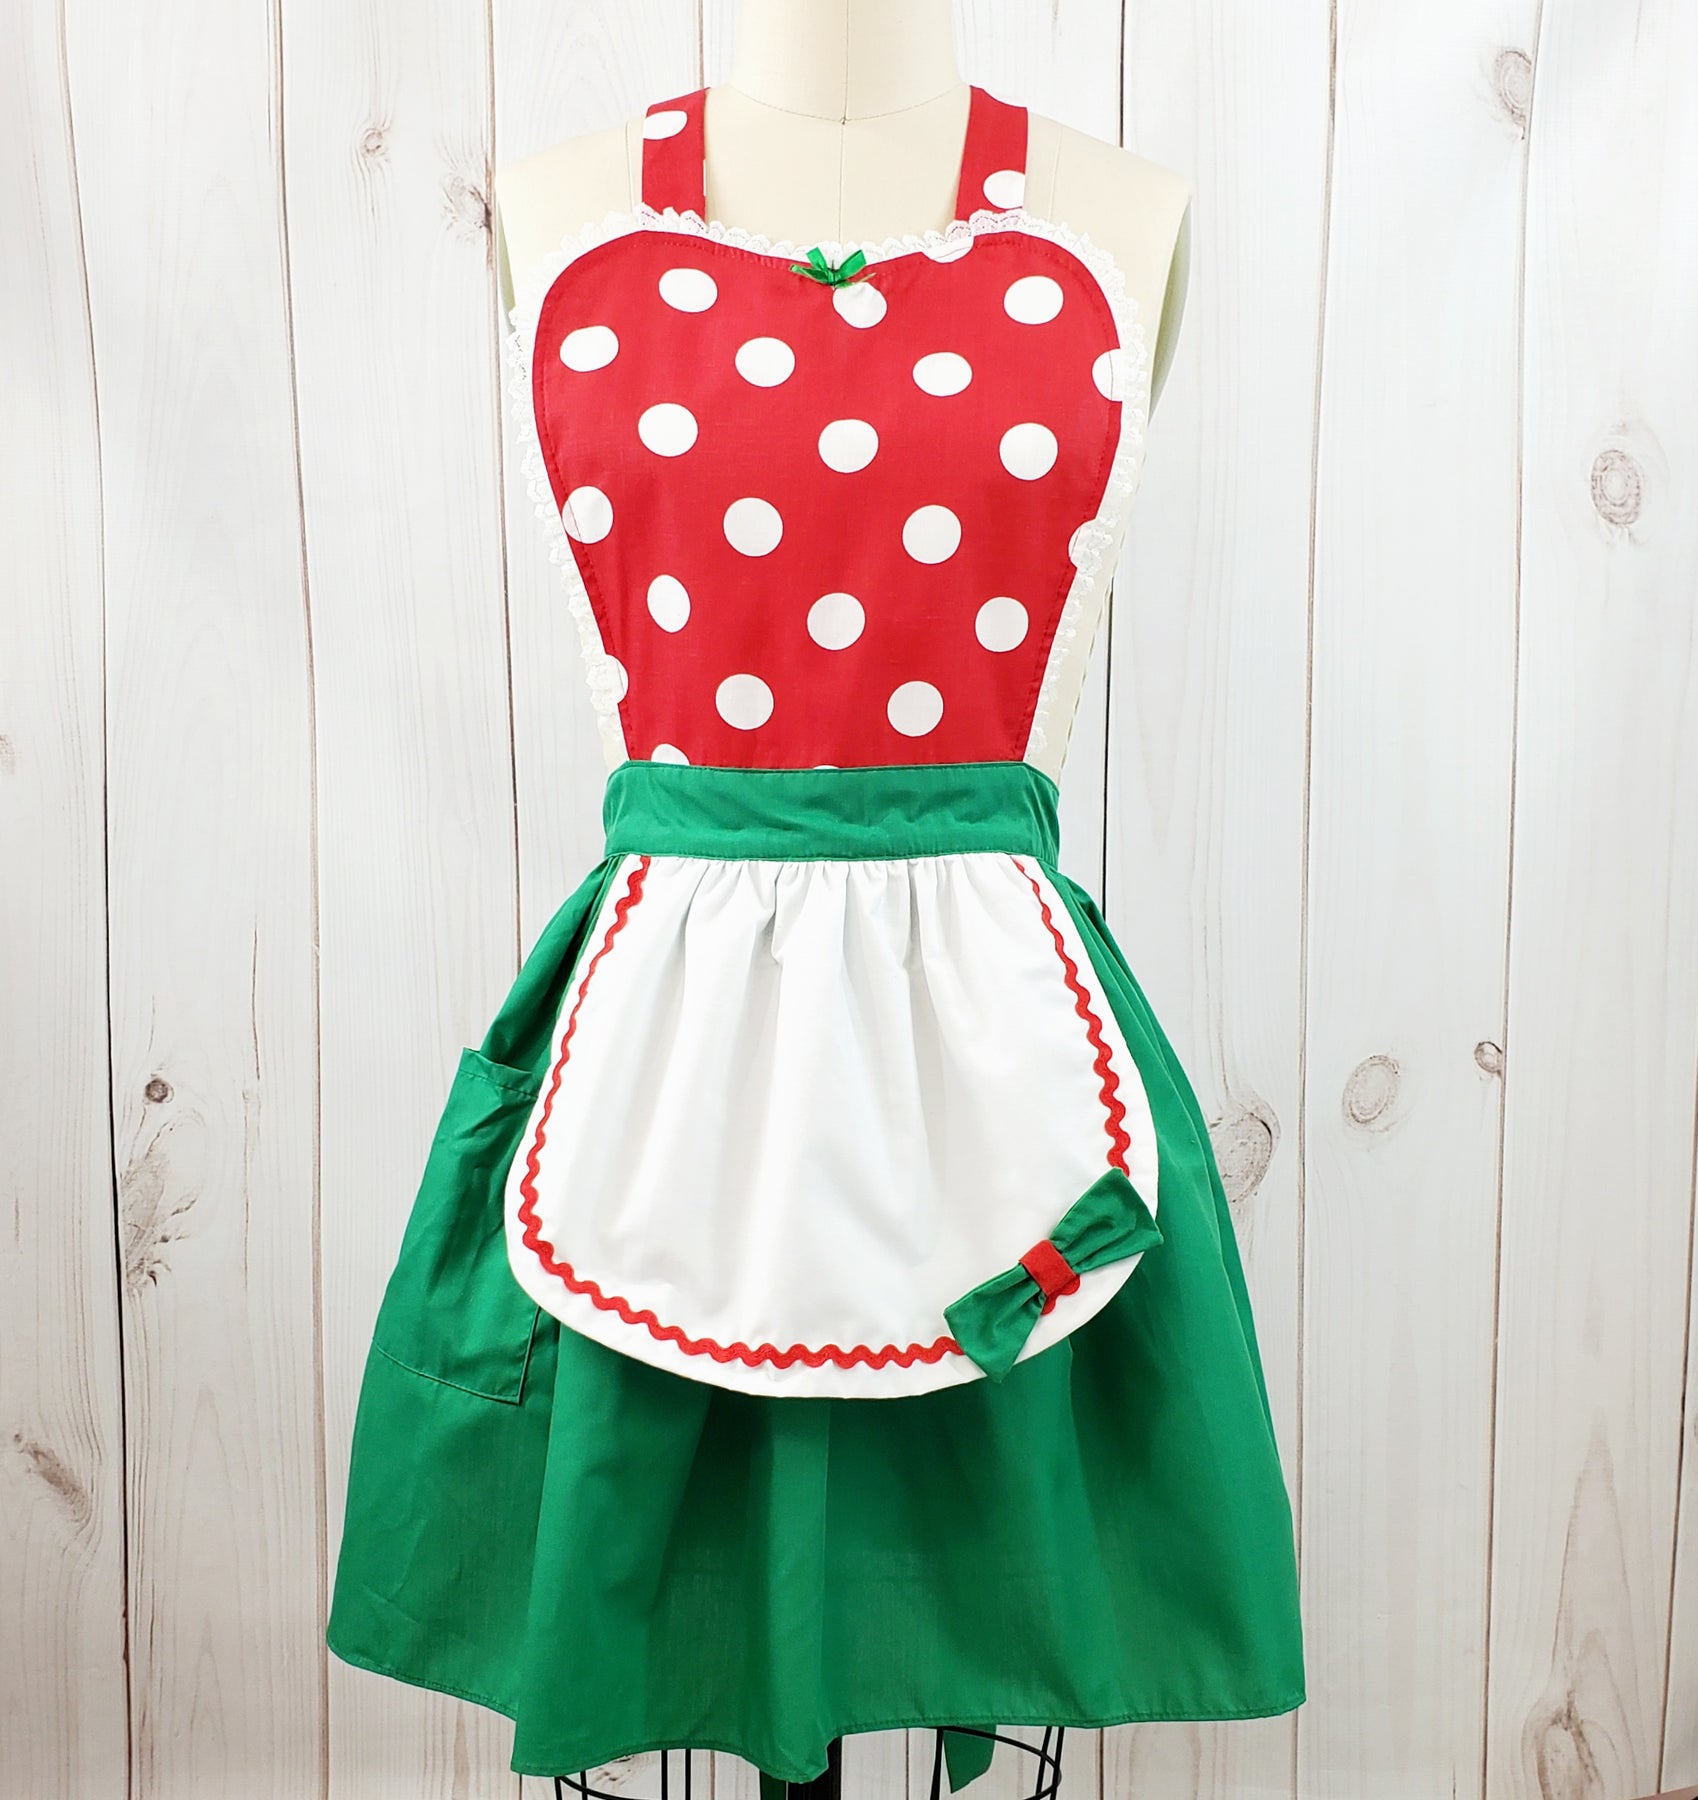 Women's and girl's matching retro style Christmas aprons